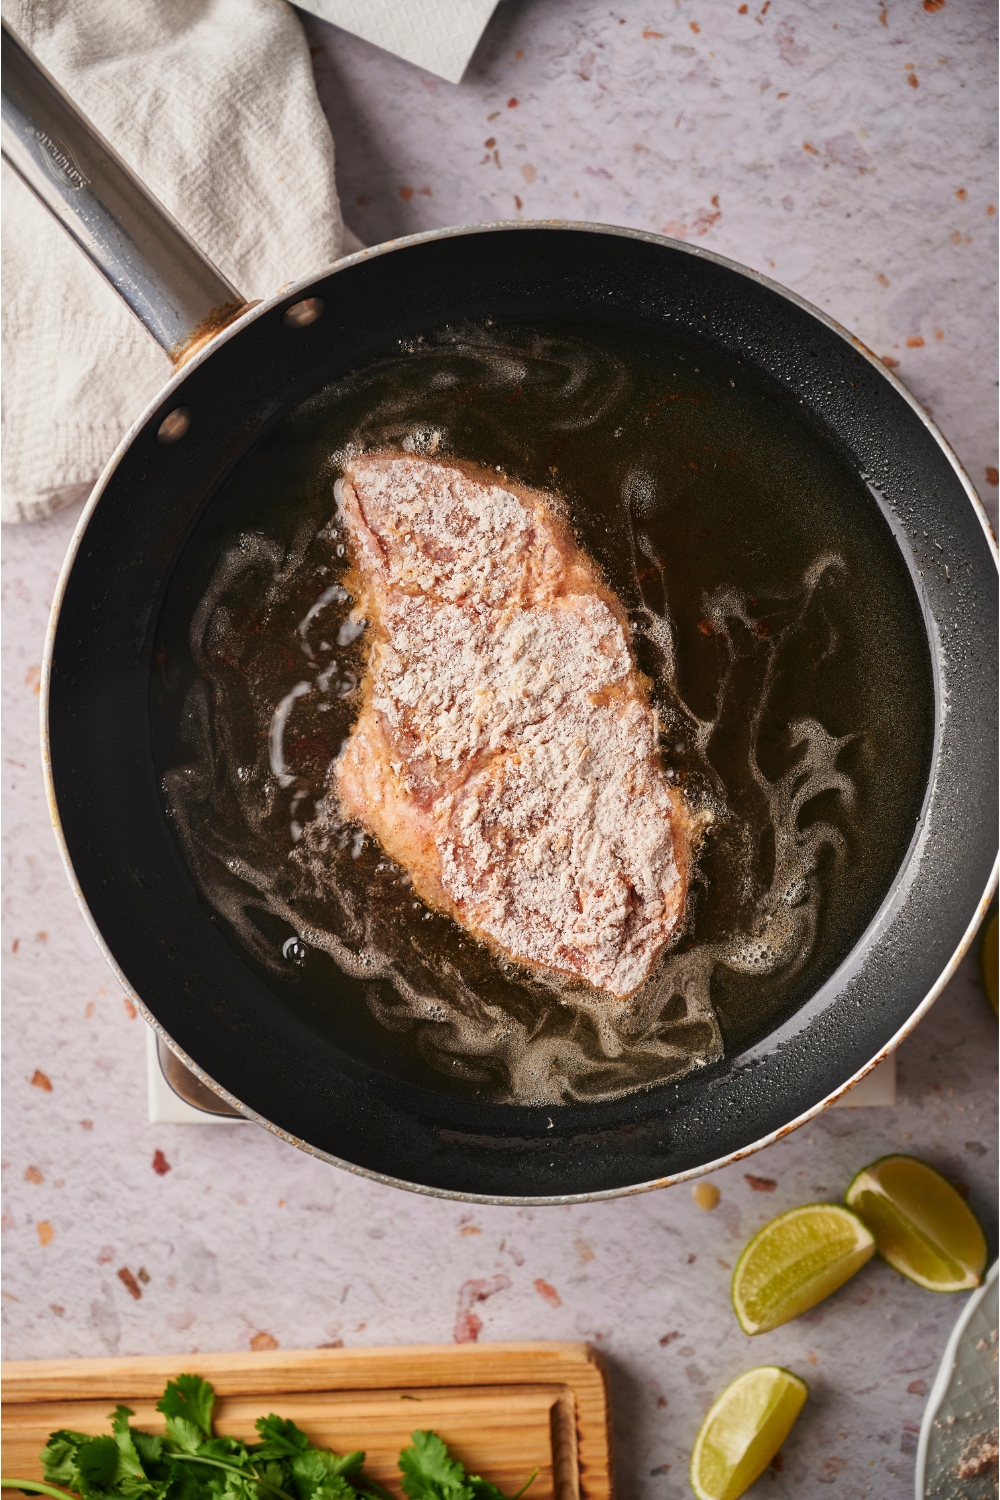 A pork chop coated in flour frying in a pan of oil.